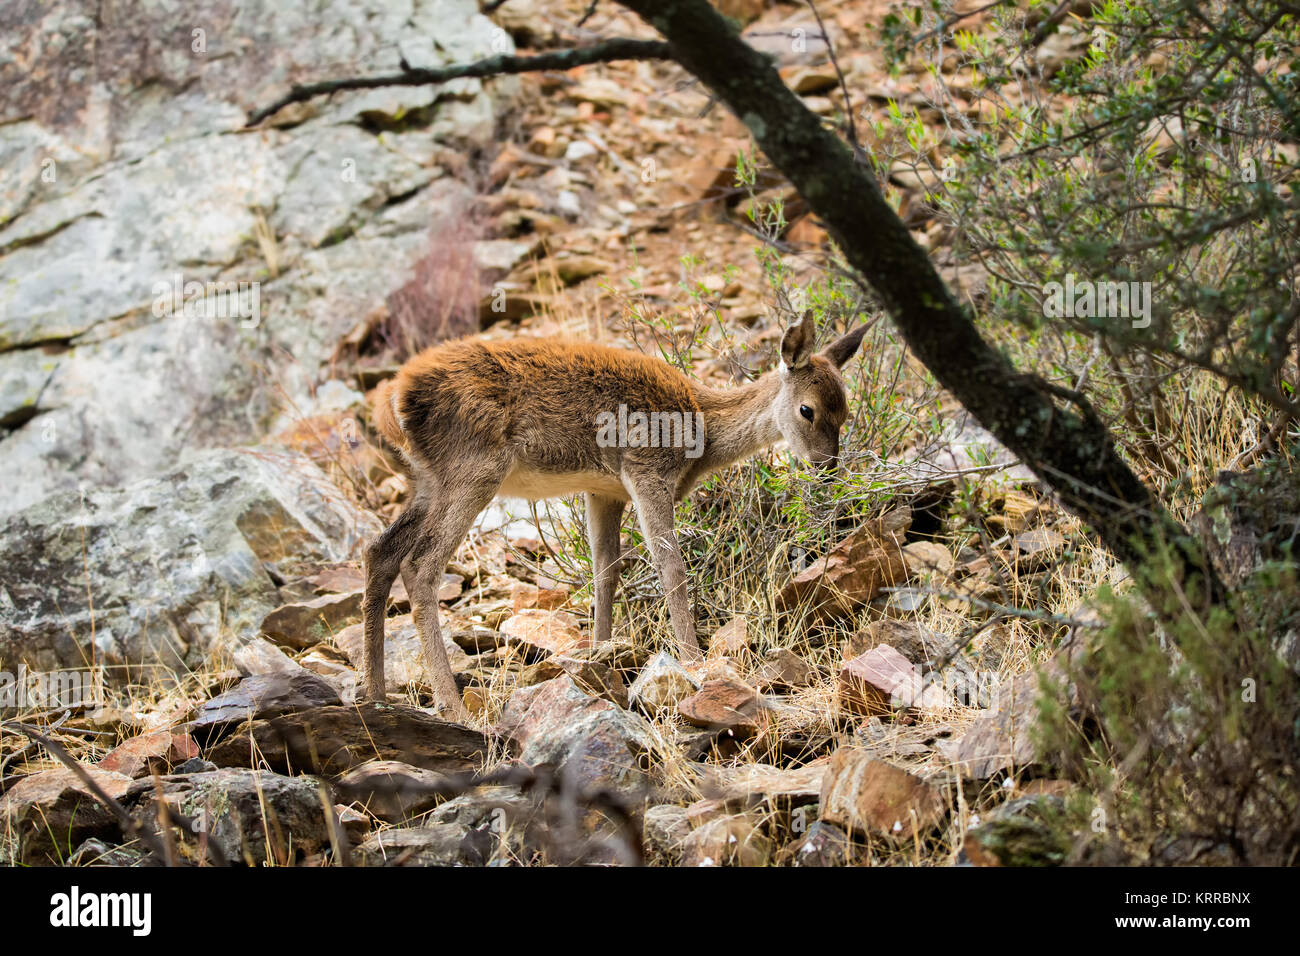 Fawn photographed at the National Park Monfragüe. Spain. Stock Photo